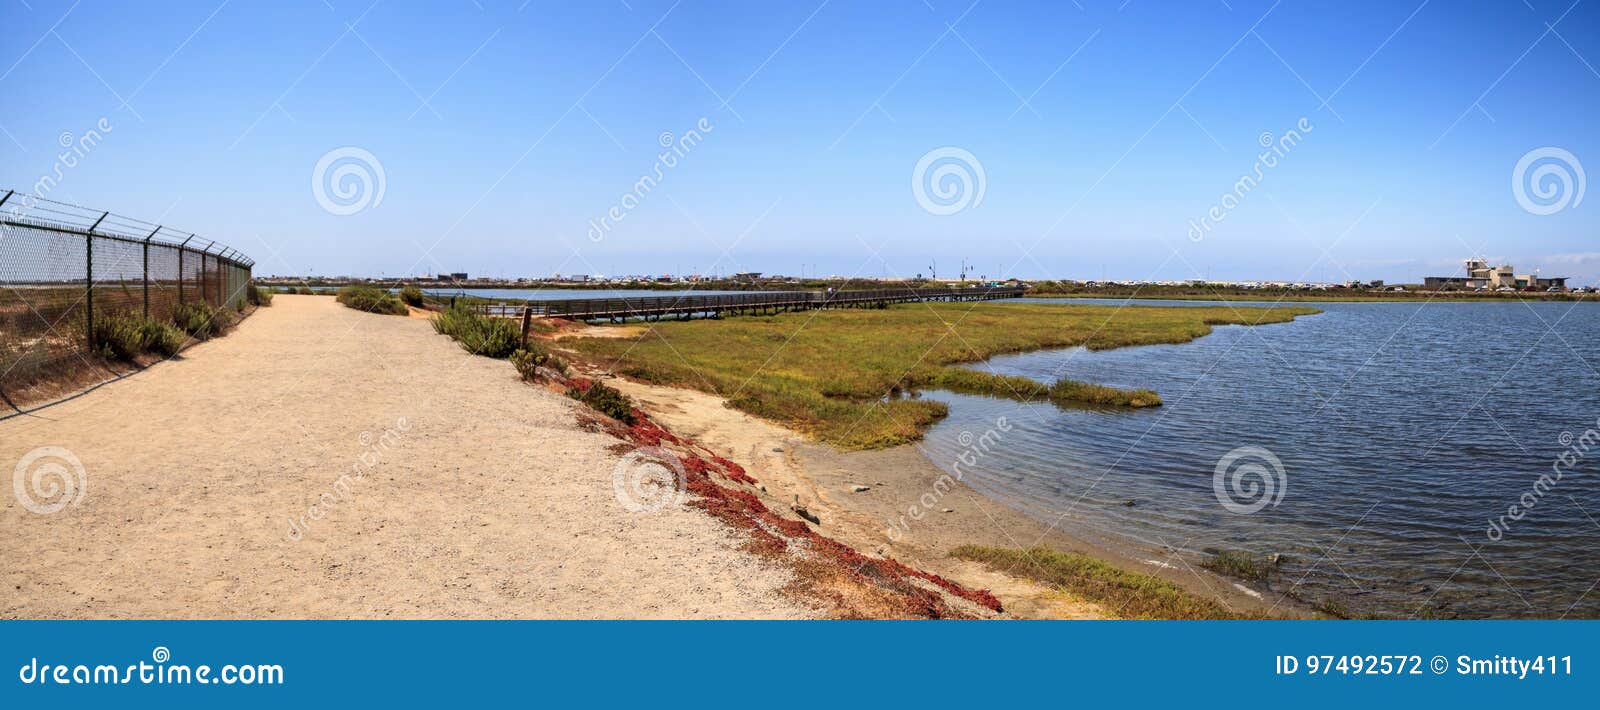 path along the peaceful and tranquil marsh of bolsa chica wetlands